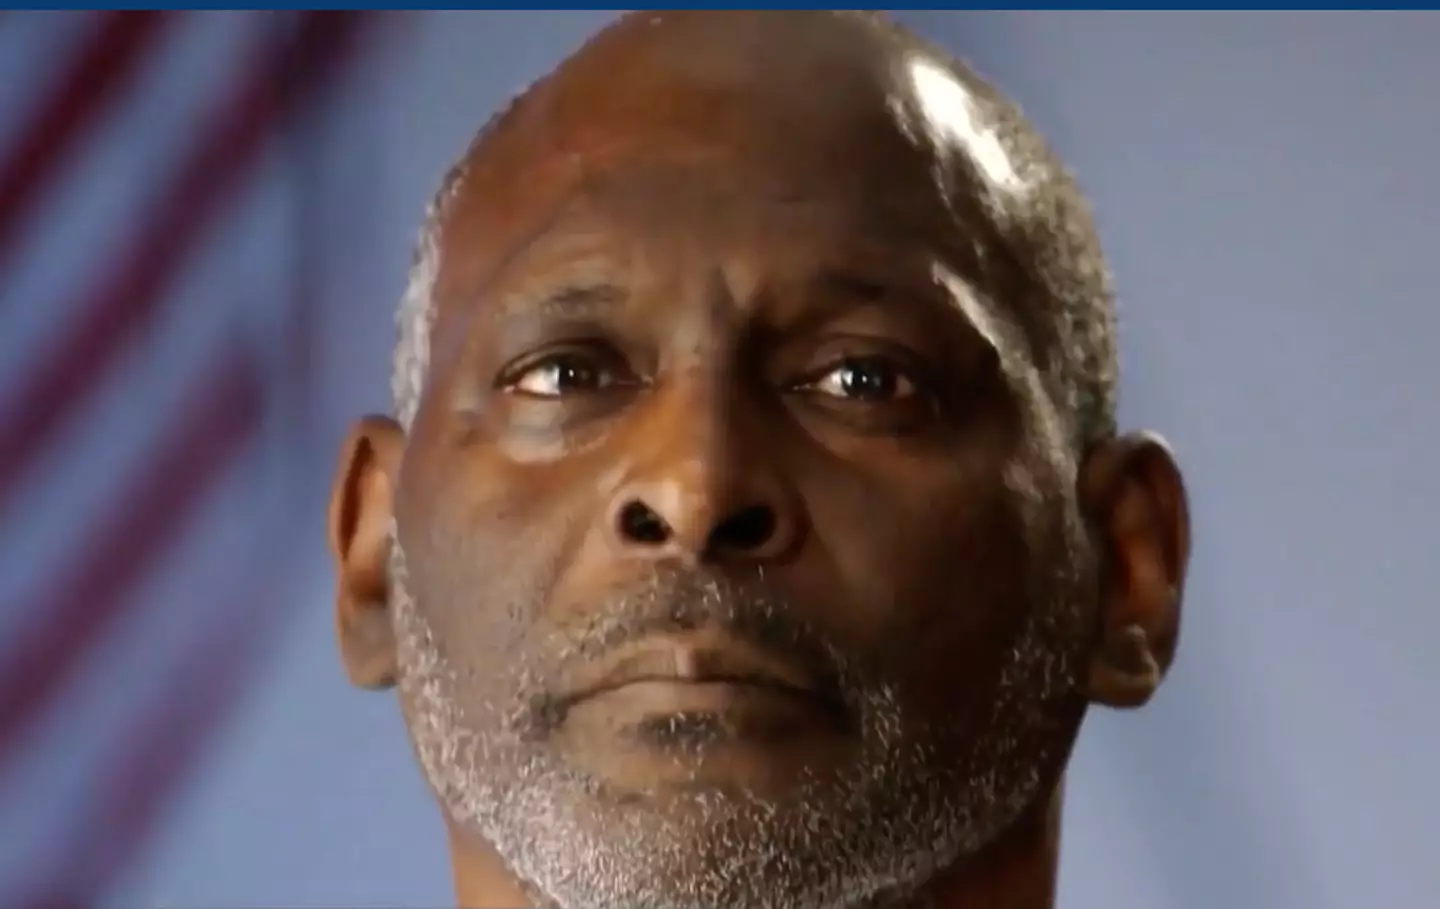 Green spent 28 years in prison before his conviction was overturned.